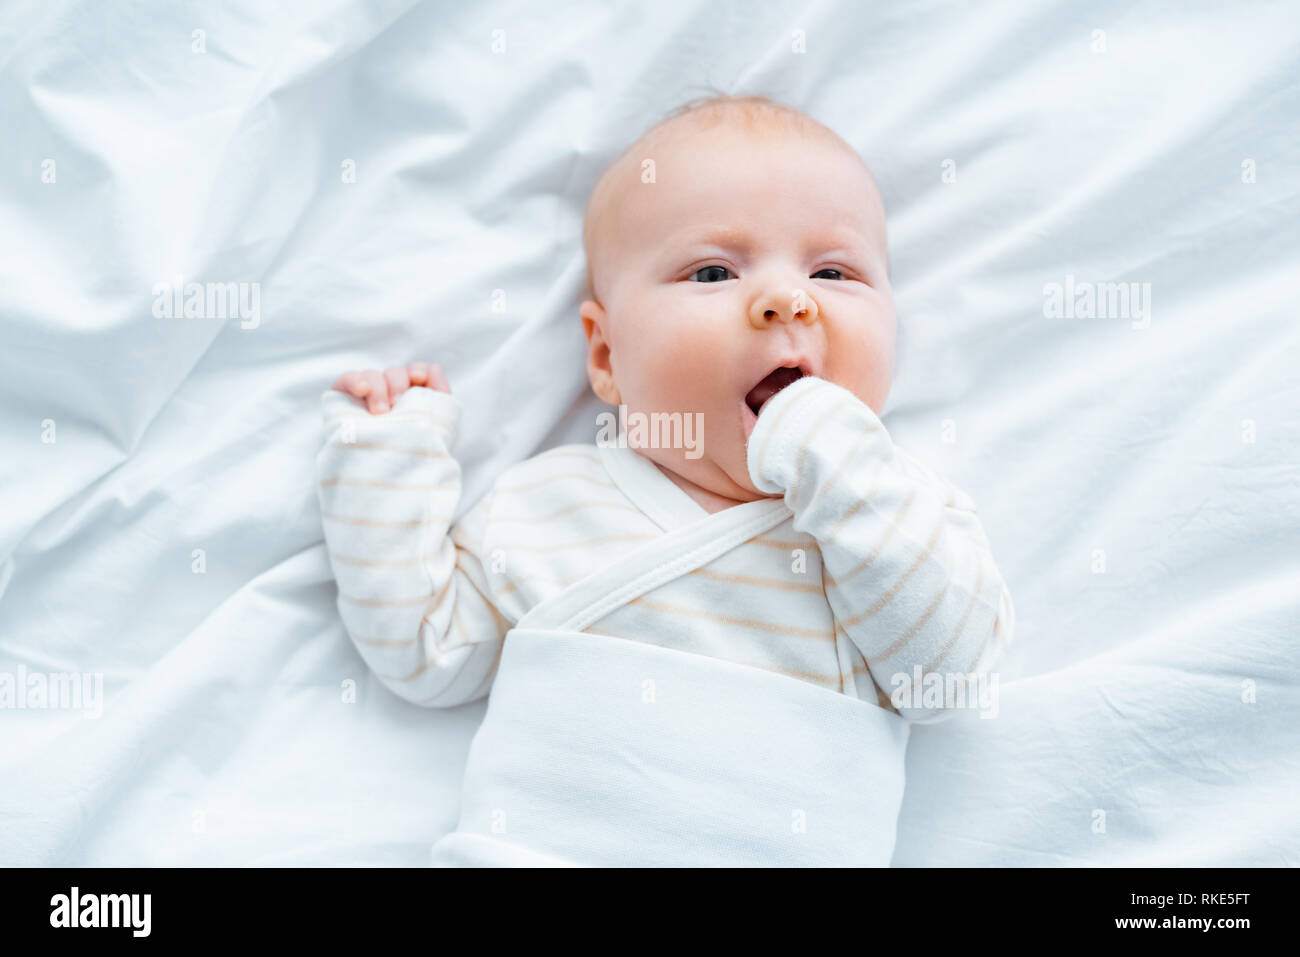 top view of adorable baby lying on white bedding Stock Photo